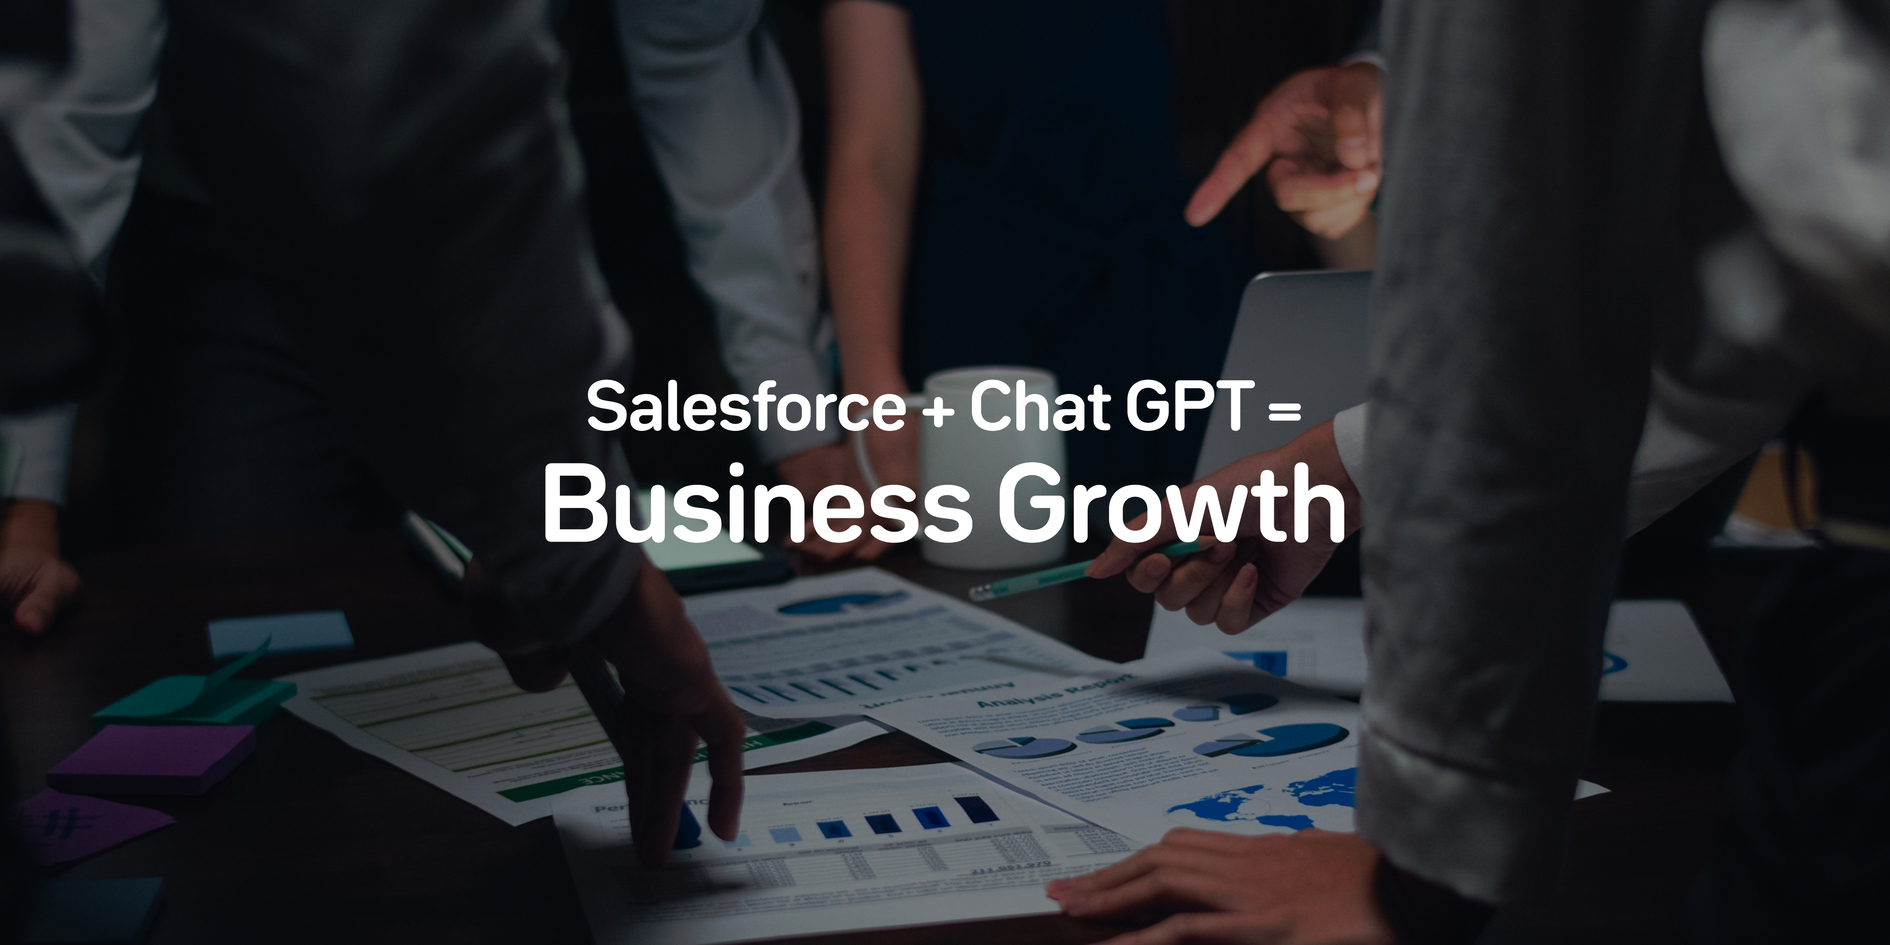 How Does Salesforce Help Slack Users Using Chat GPT?